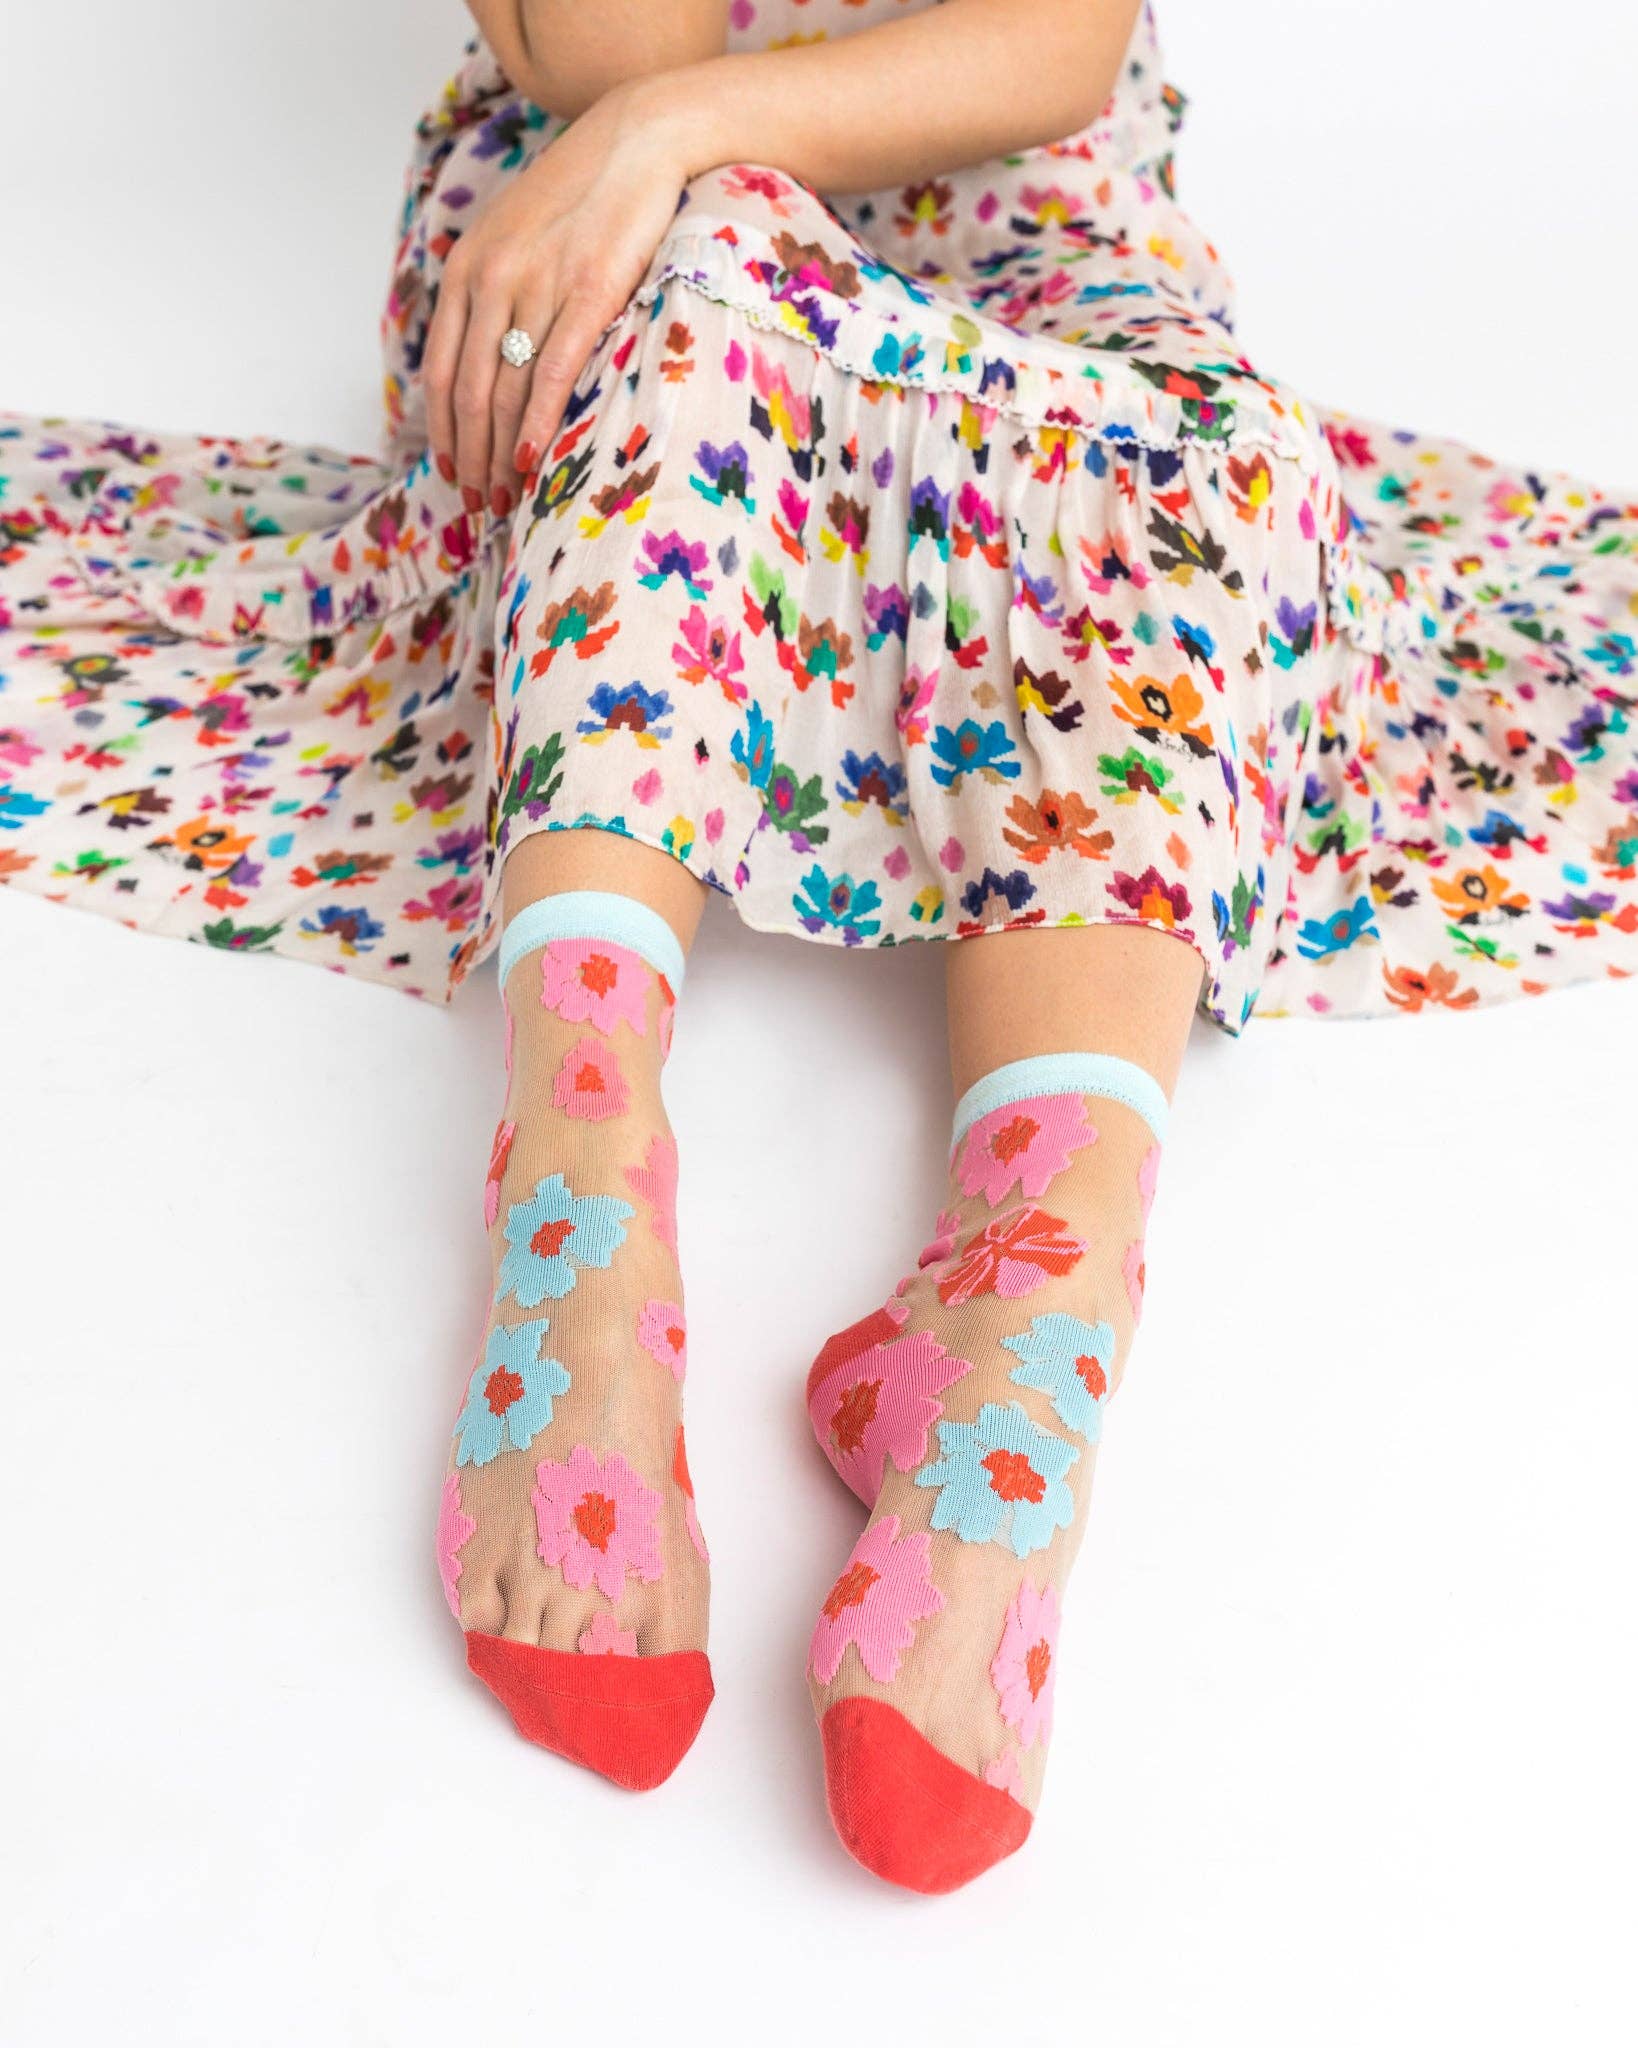 RIBBON ROSES SHEER ANKLE SOCK BY SOCK CANDY